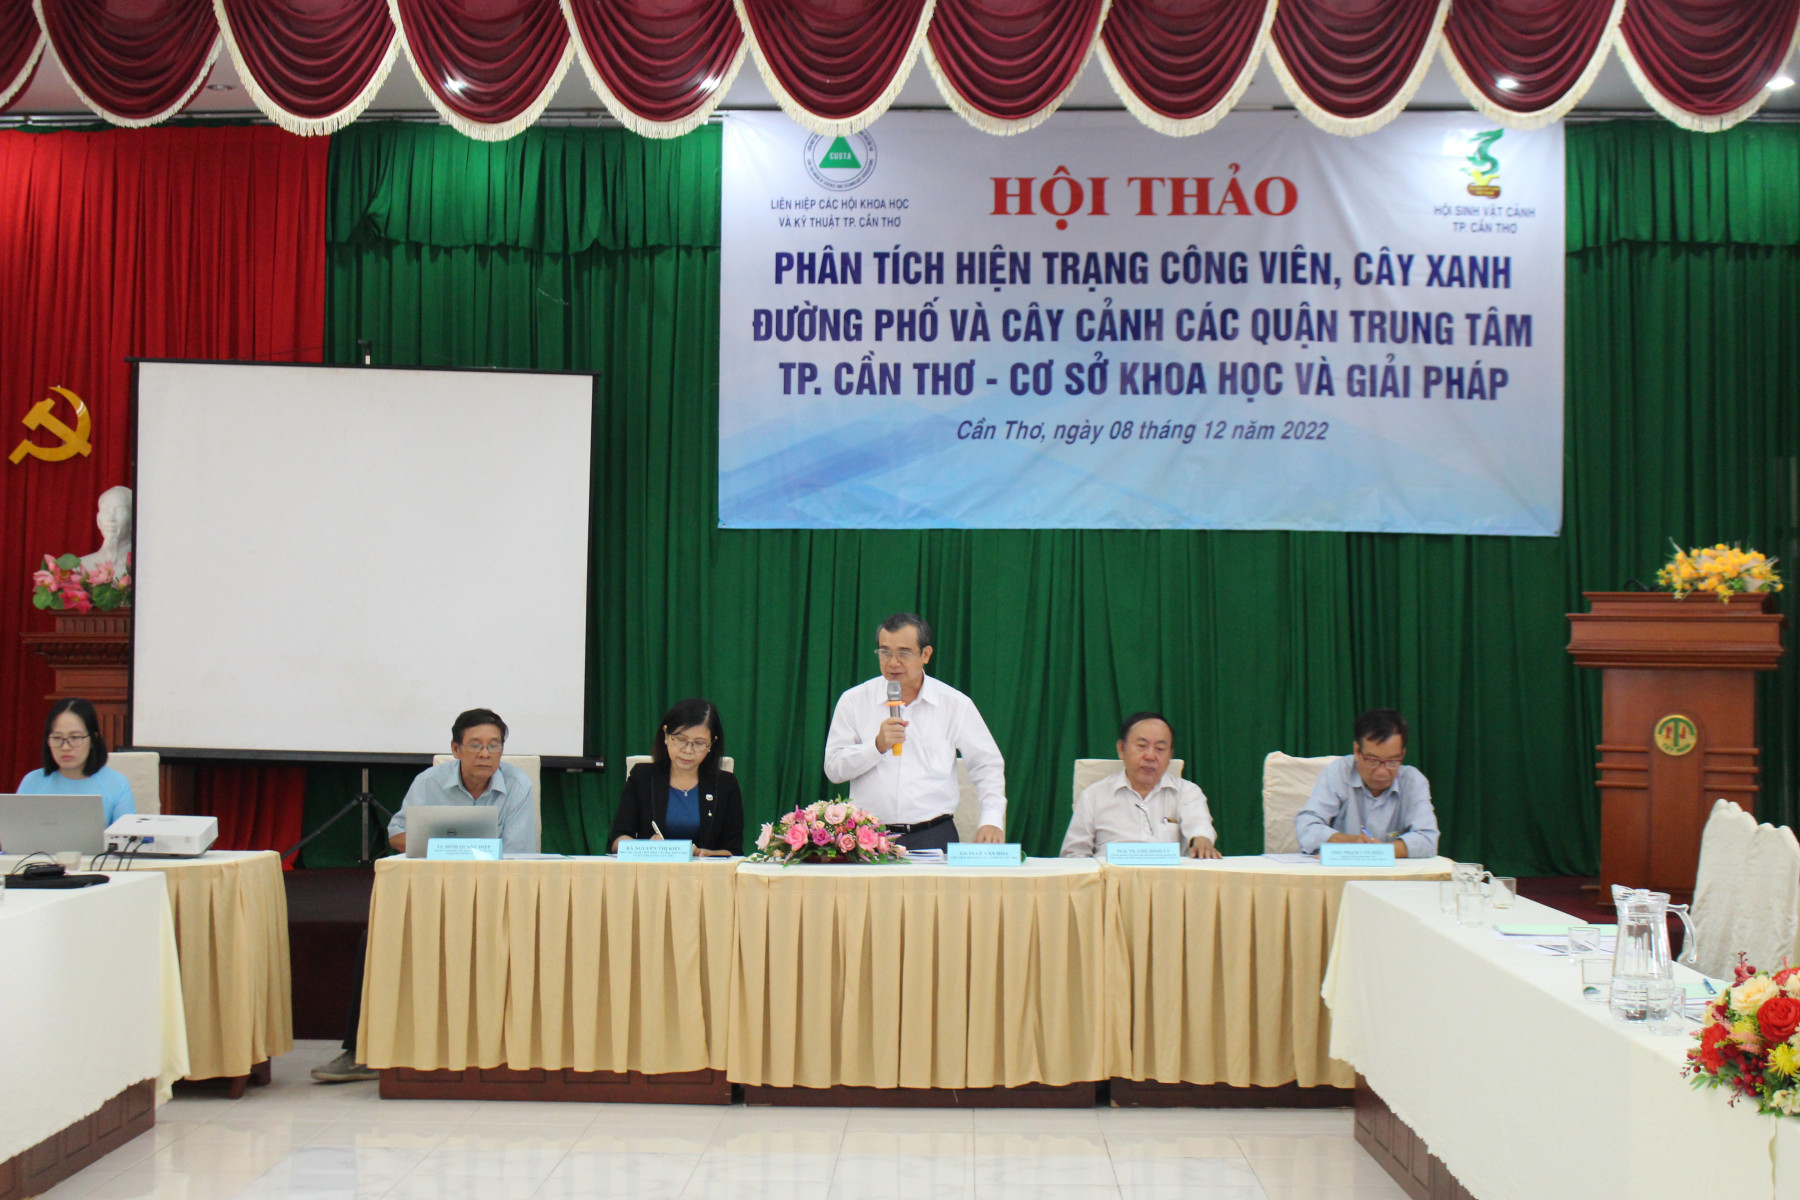 //custa.cantho.gov.vn/files/images/NAM%202022/hoi%20thao%20cay%20xanh.jpg